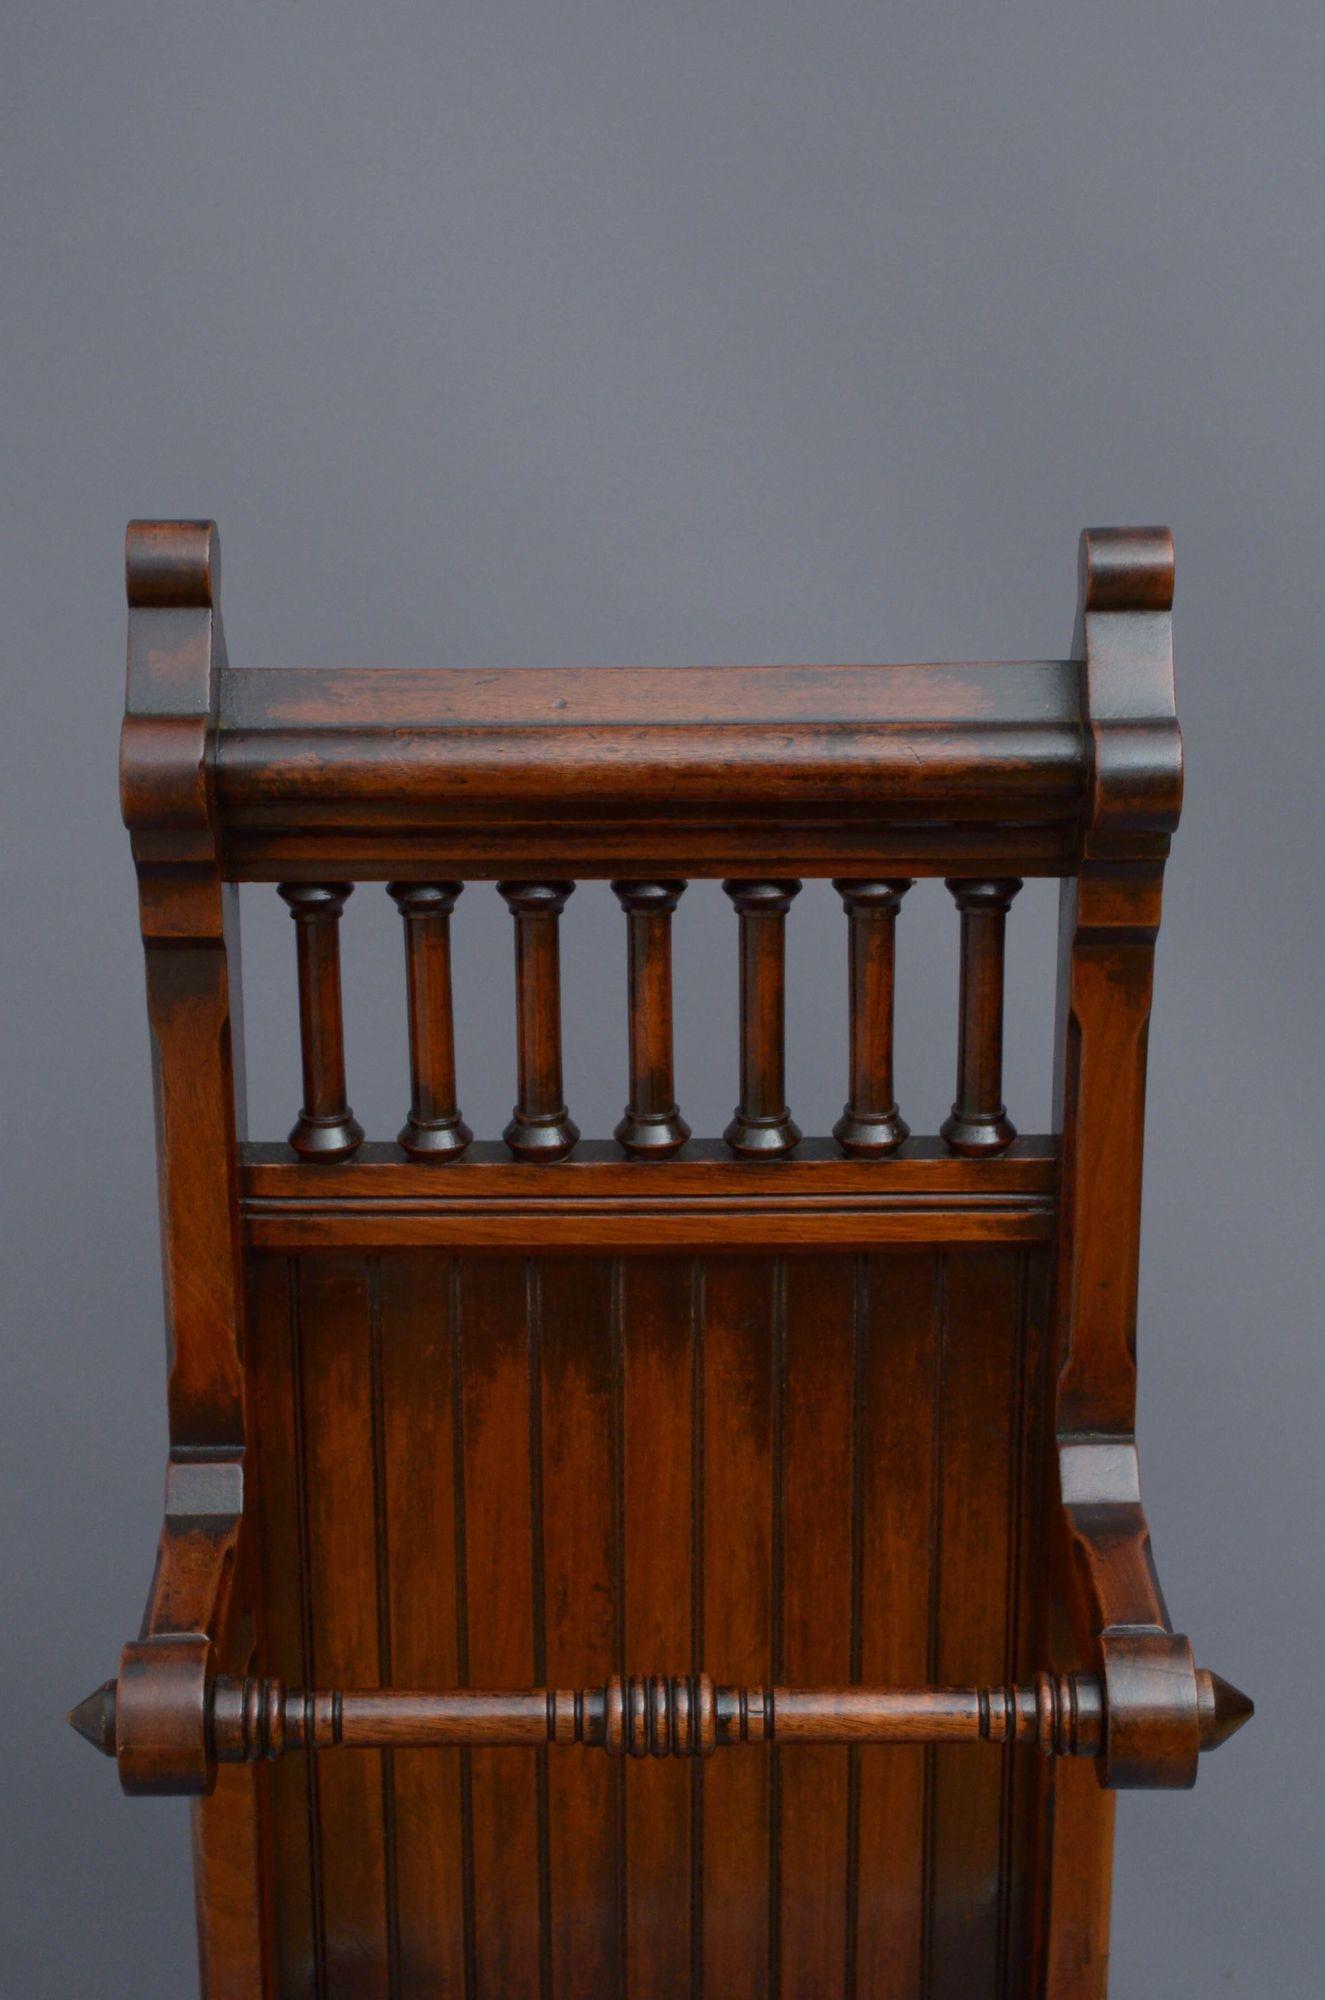 Gothic Revival Umbrella Stand in Mahogany For Sale 1